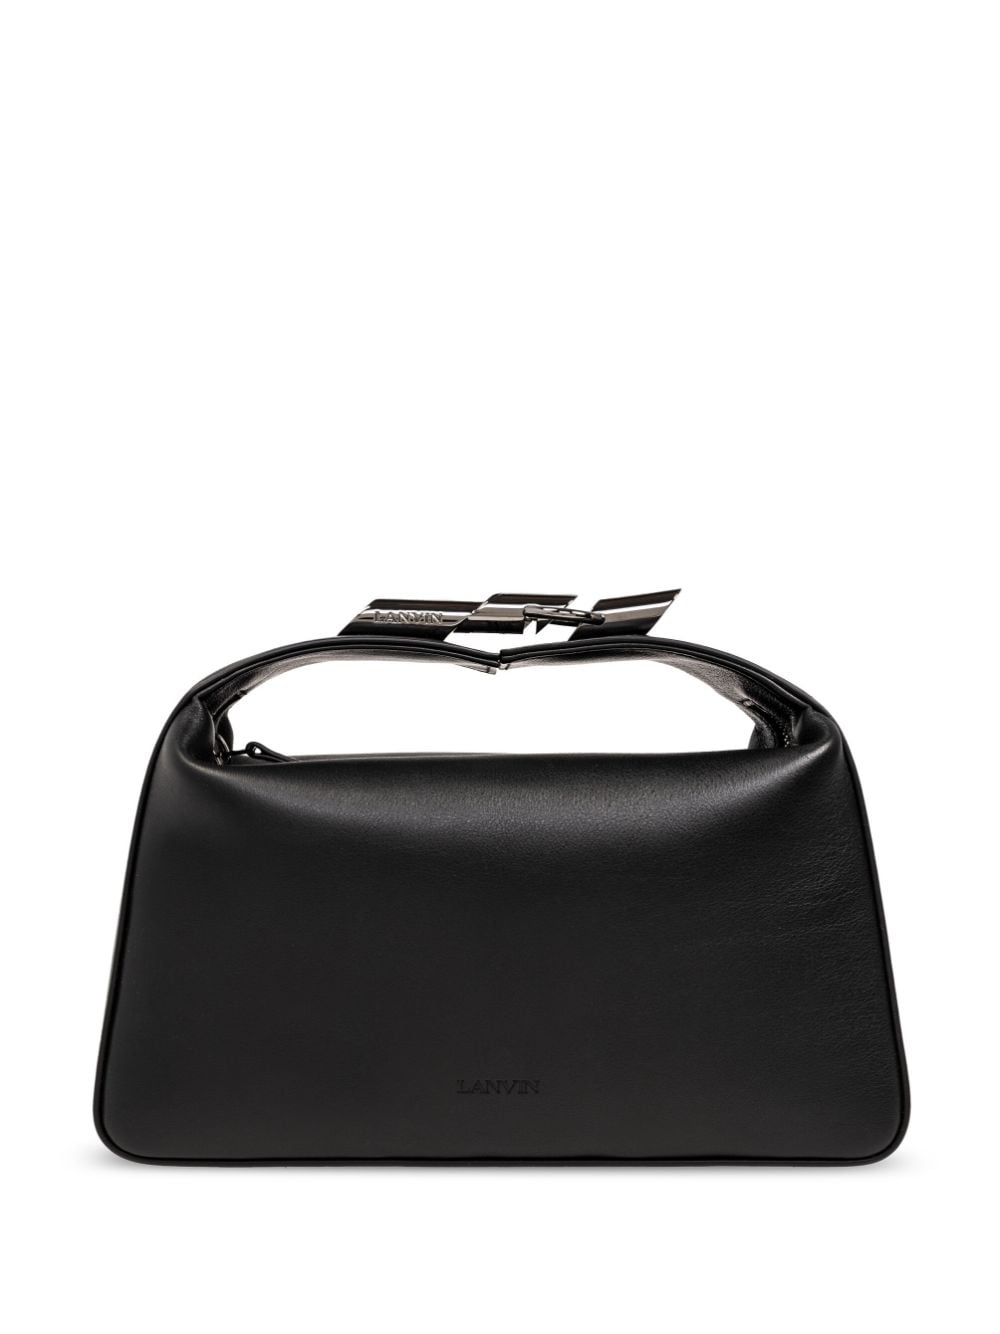 Image 1 of Lanvin leather tote bag